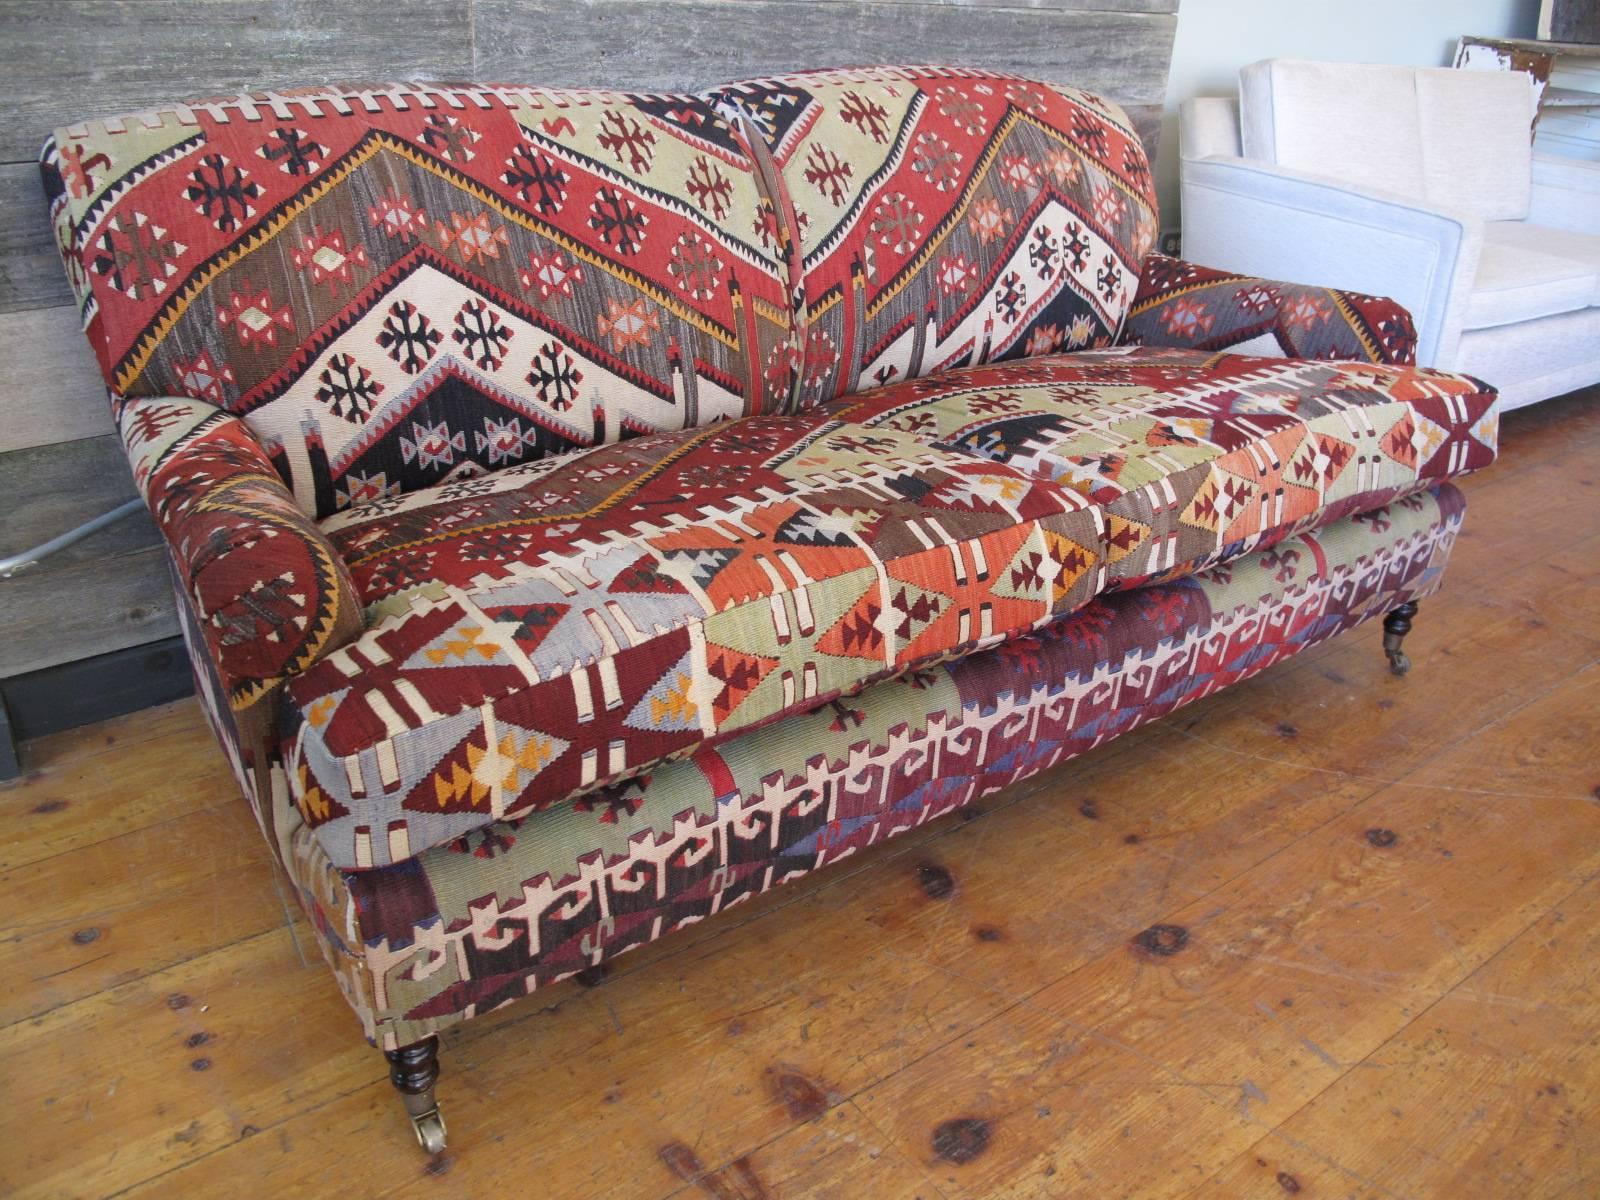 Standard roll arm sofa, made in England by George Smith. Upholstered in Kilim. Original down cushions have been replaced with a custome foam insert.